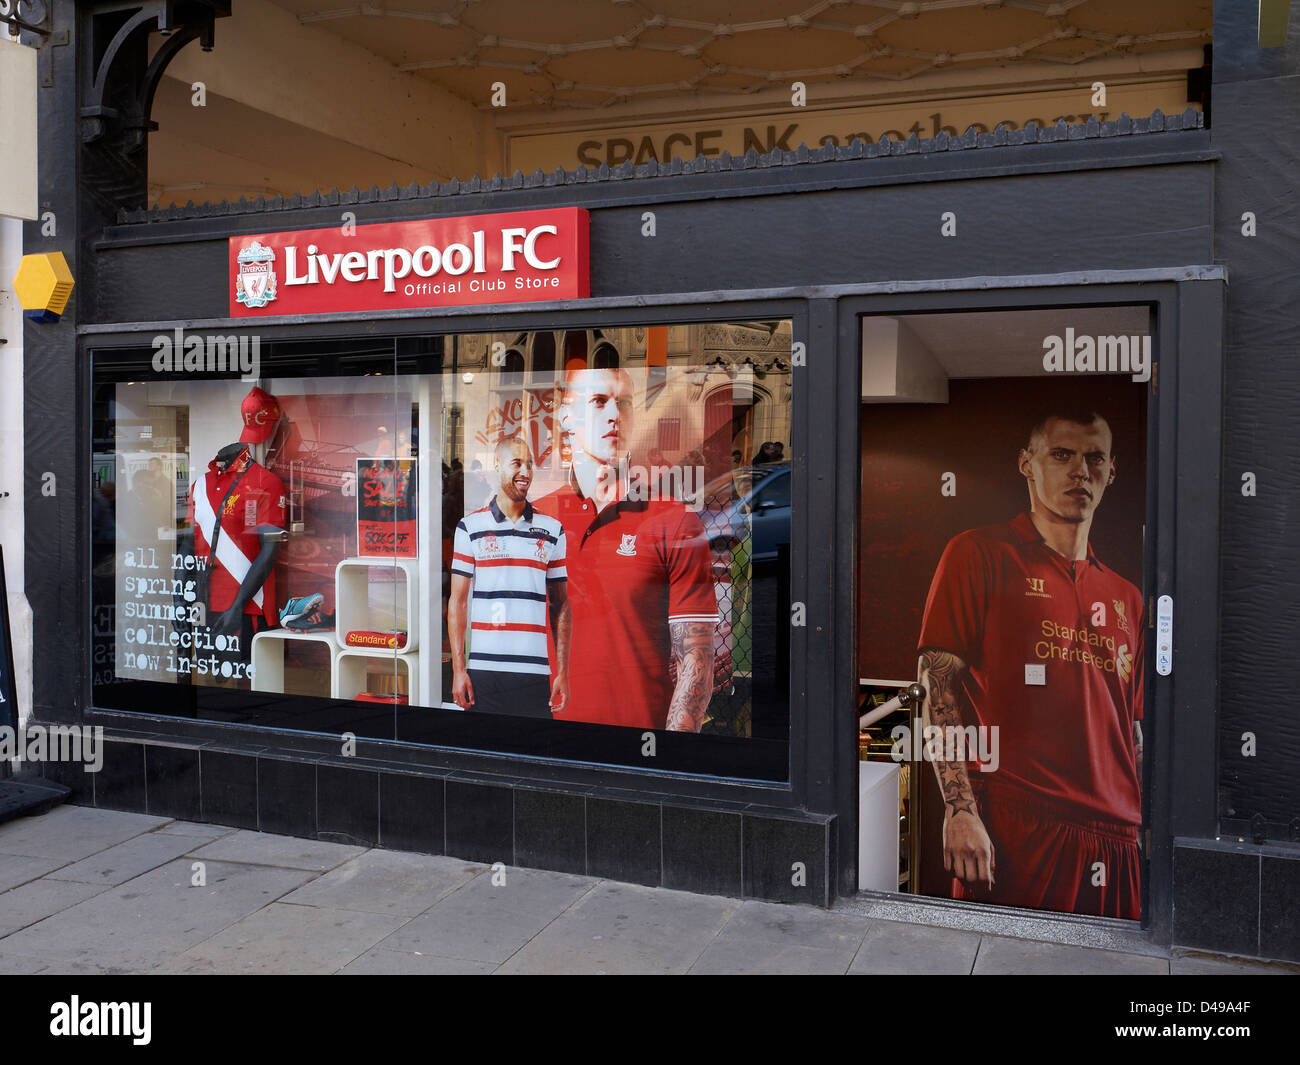 Liverpool FC official club store in Chester Cheshire UK Stock Photo